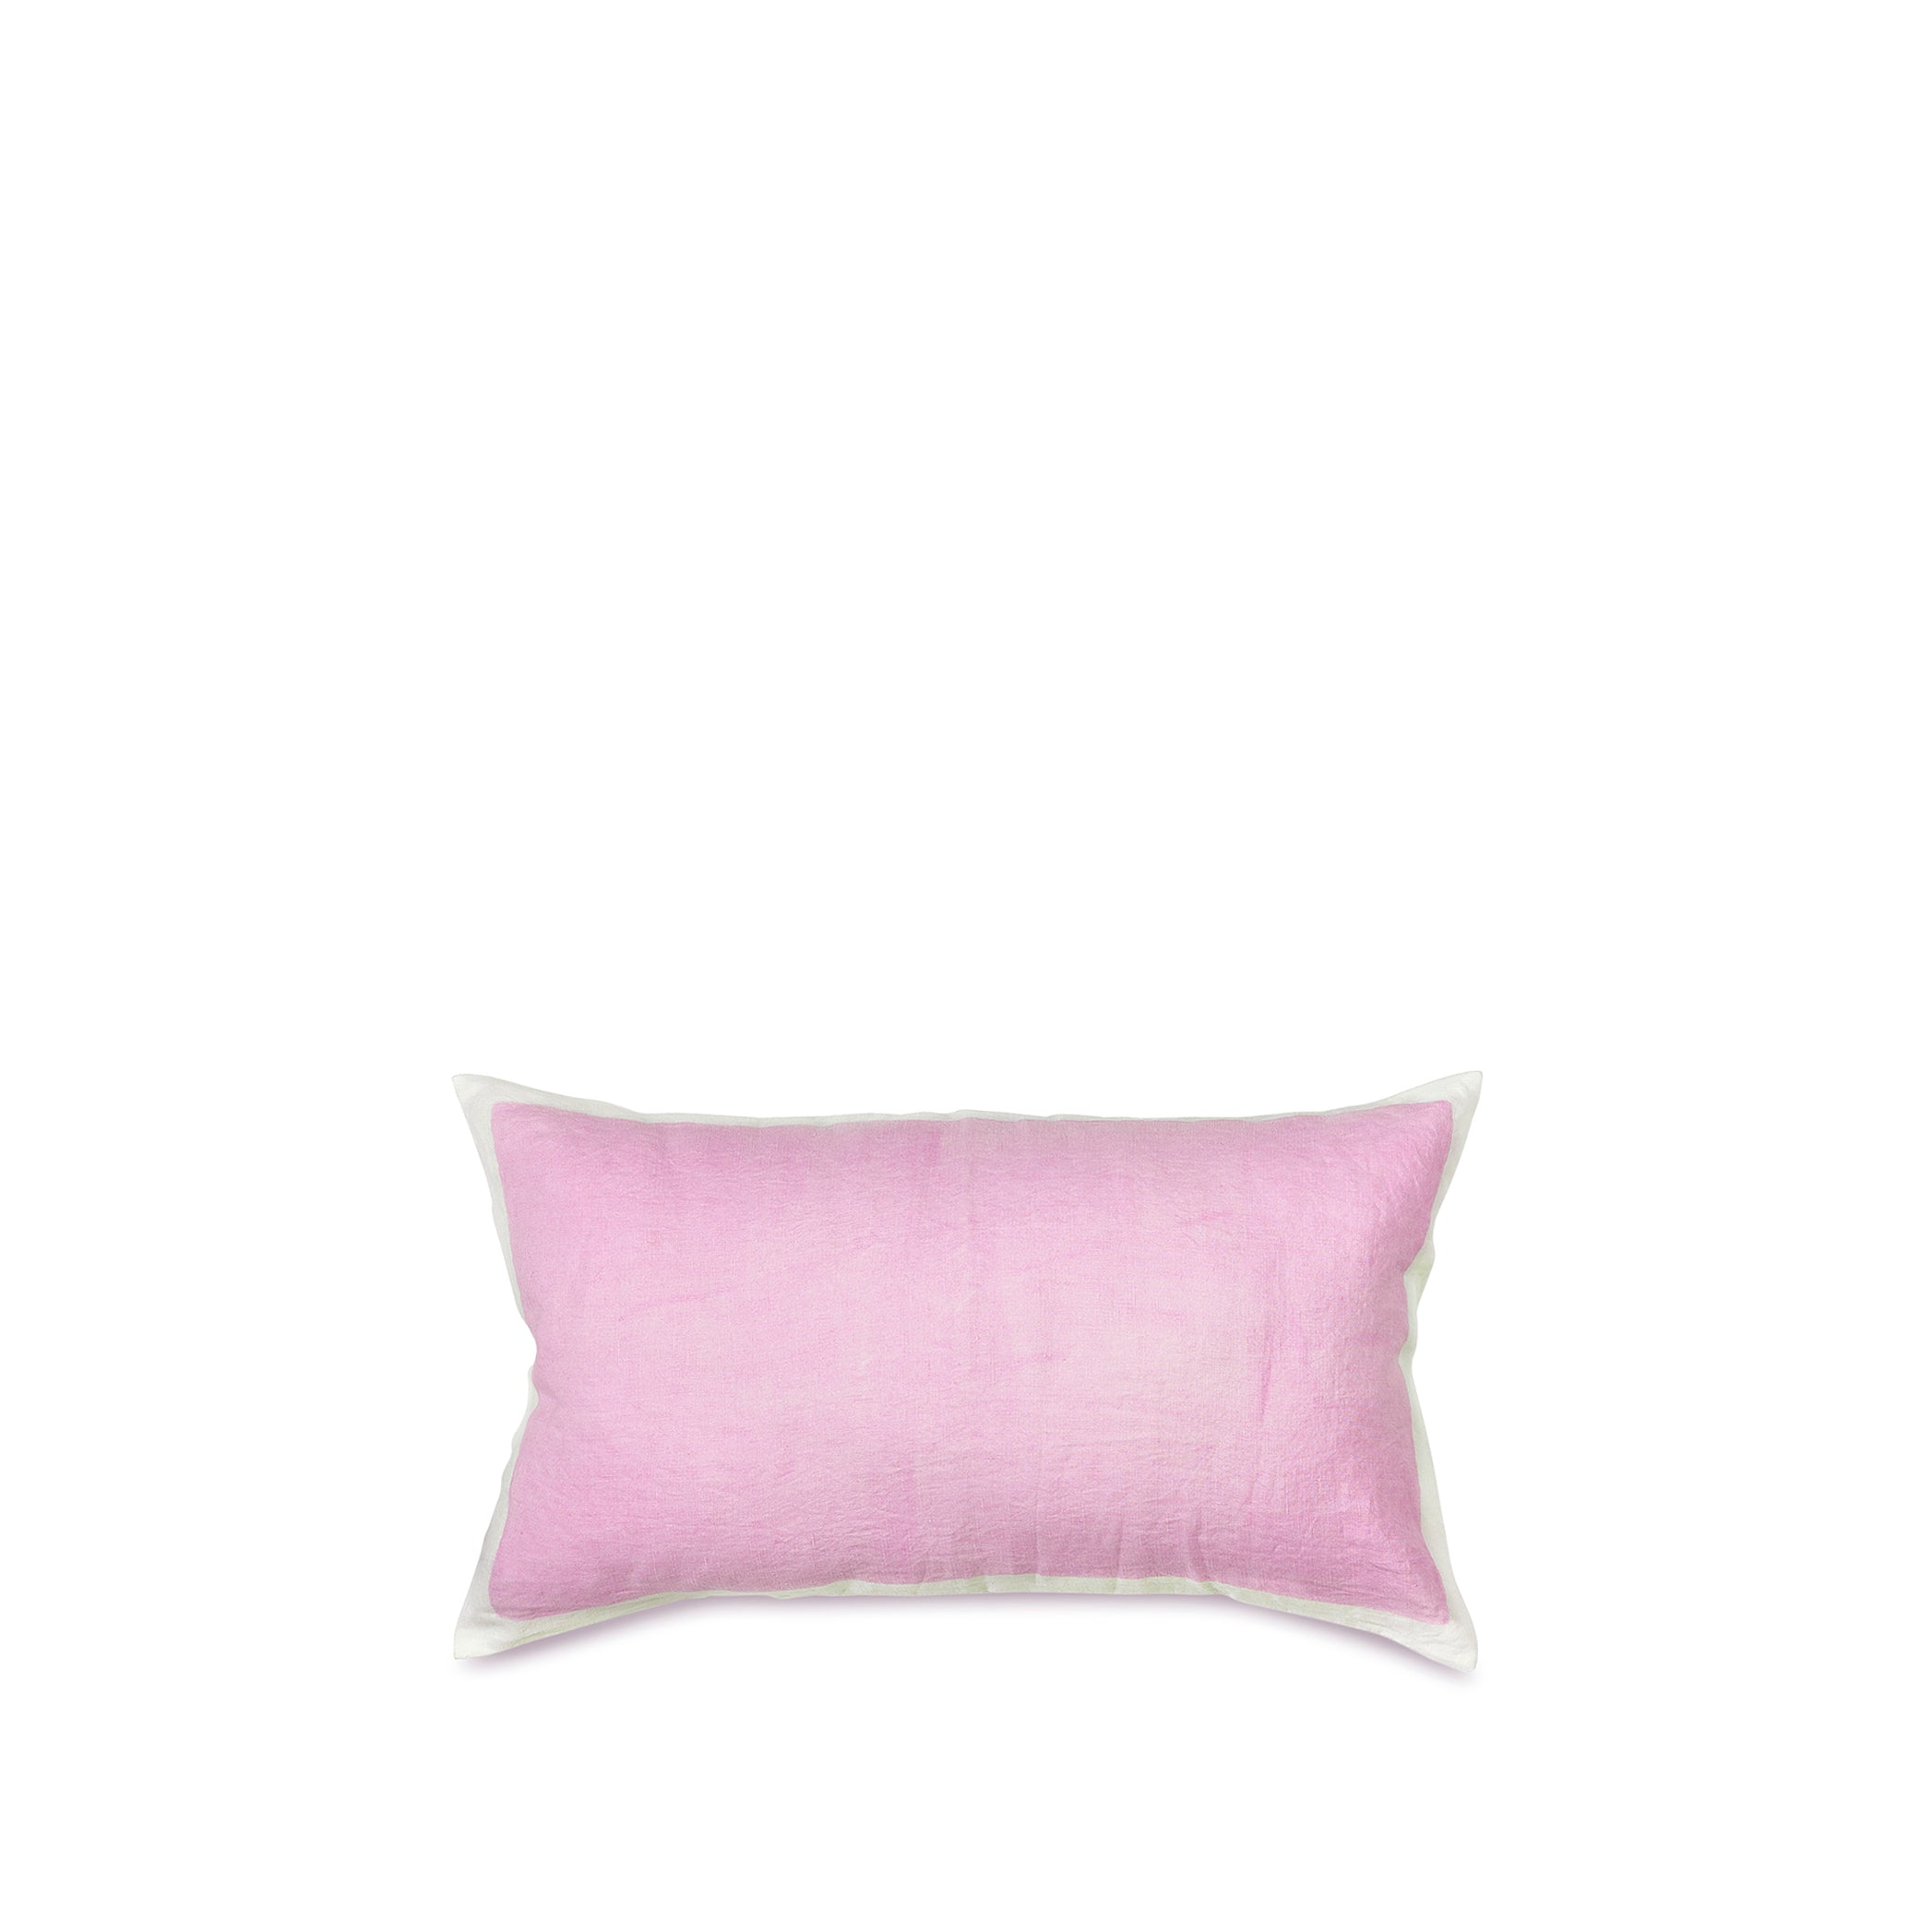 Hand Painted Linen Cushion in Pale Pink, 50cm x 30cm